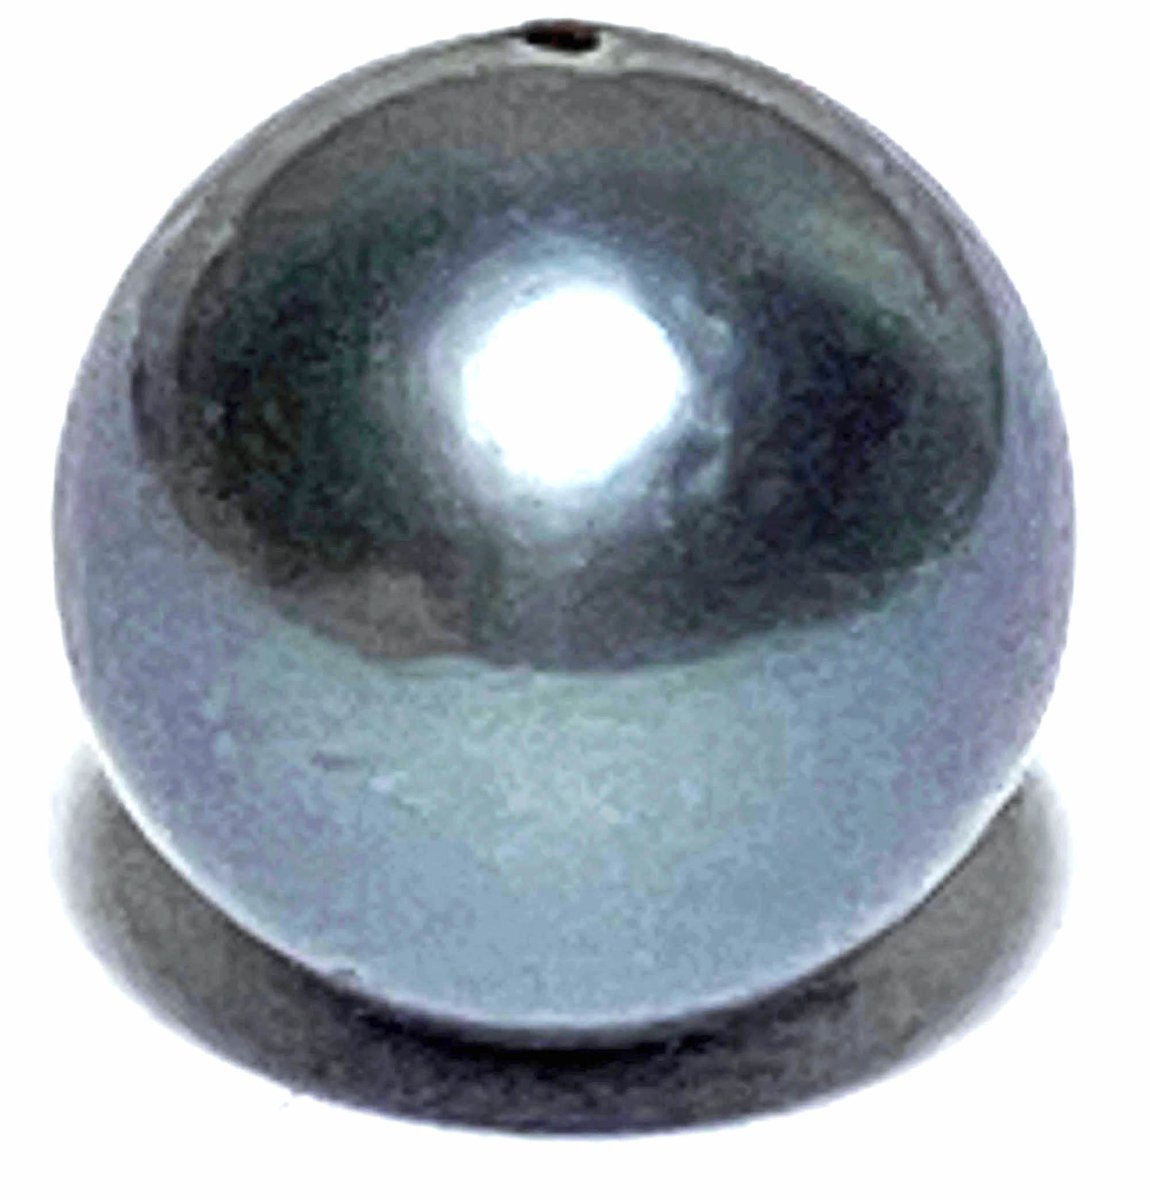 Excited to share the latest addition to my #etsy shop: Massive 12.3mm French Polynesia Tahitian South Sea Natural Peacock Gray Blue Round Cultured Fully Drilled Loose Pearl For Make Own Jewelry https://t.co/pHkH8BnUlu #gray #pearl #bridalshower #round #green #mothersda https://t.co/iC3XvU7iqL